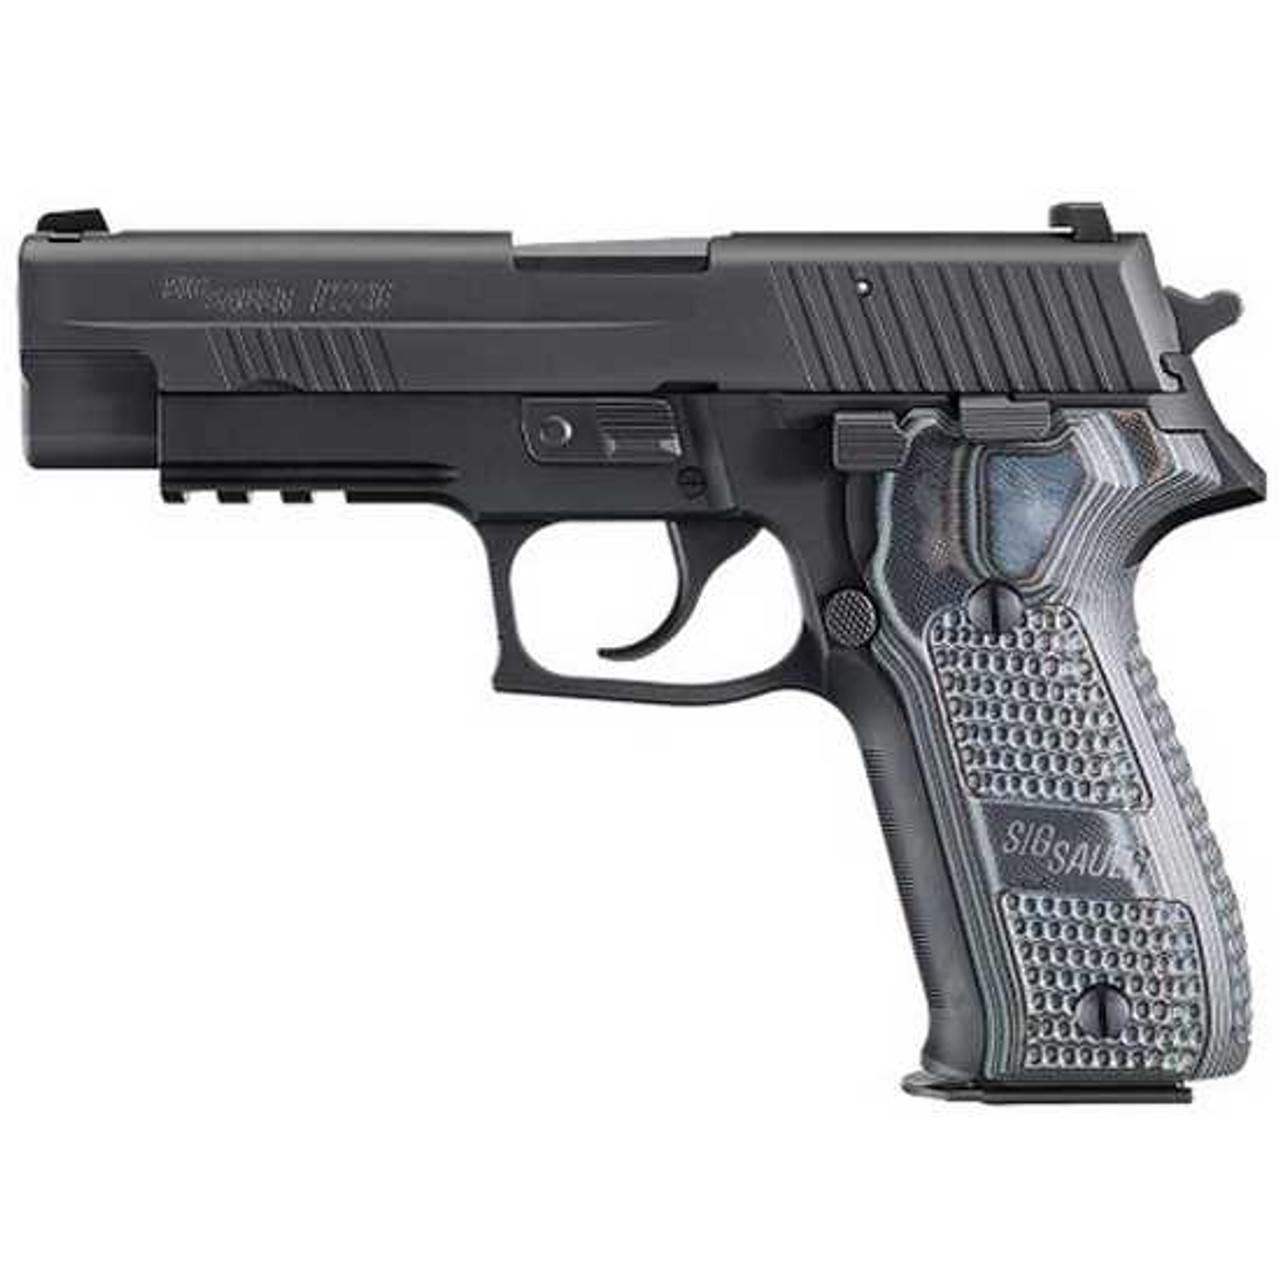 SIG P226 FS EXTREME 9MM 4.4 10RD CA LEGAL